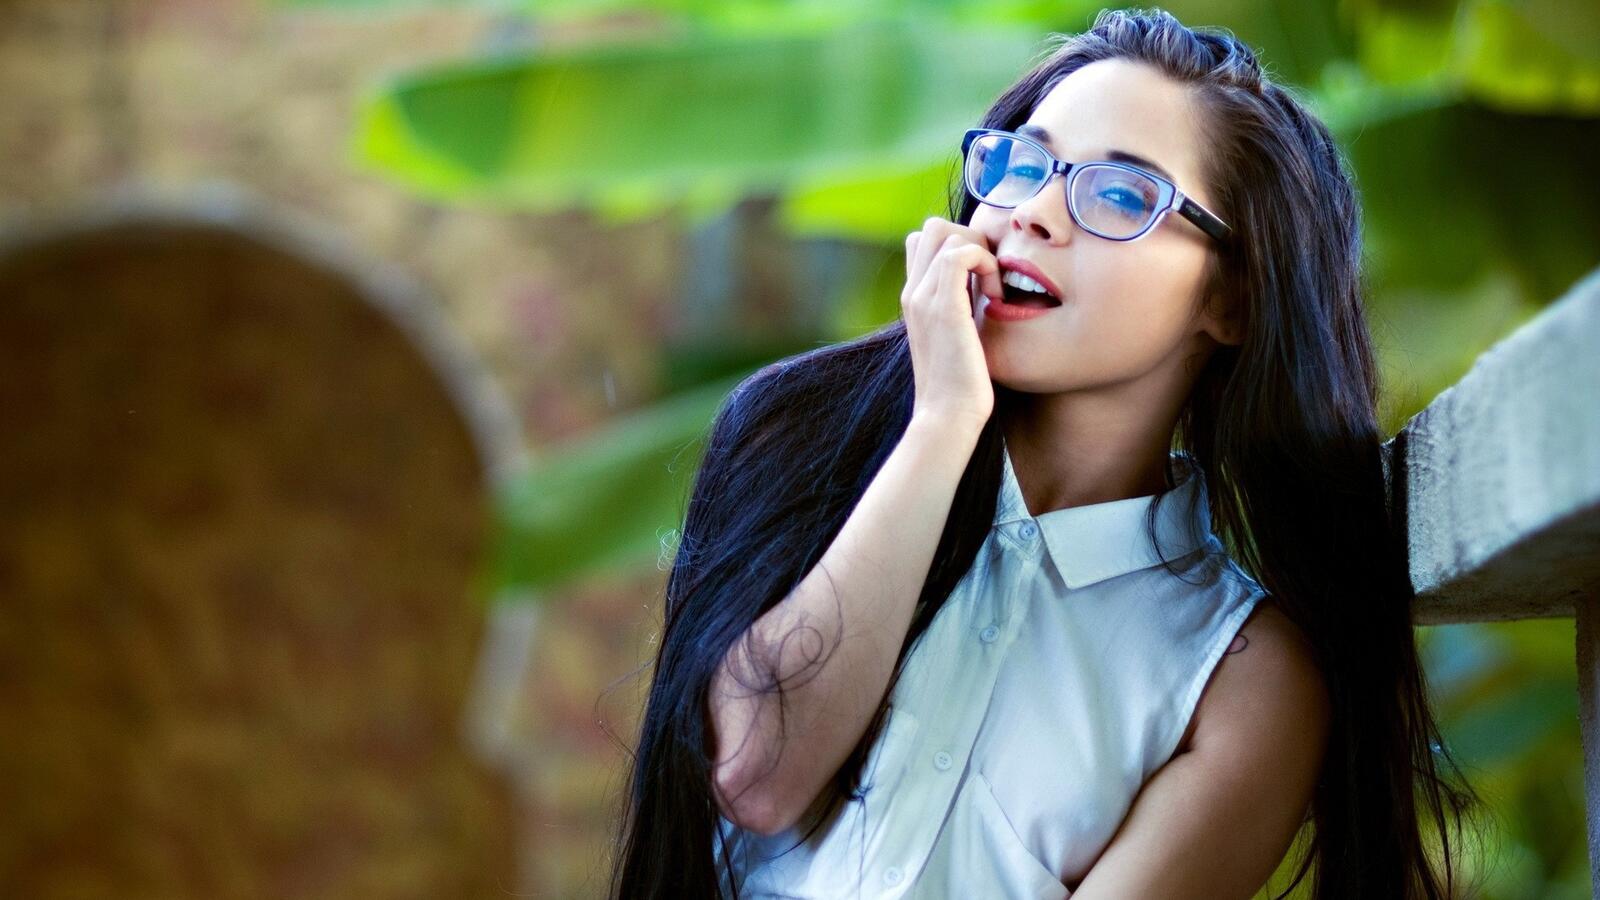 Free photo A young girl in a white blouse and vision glasses